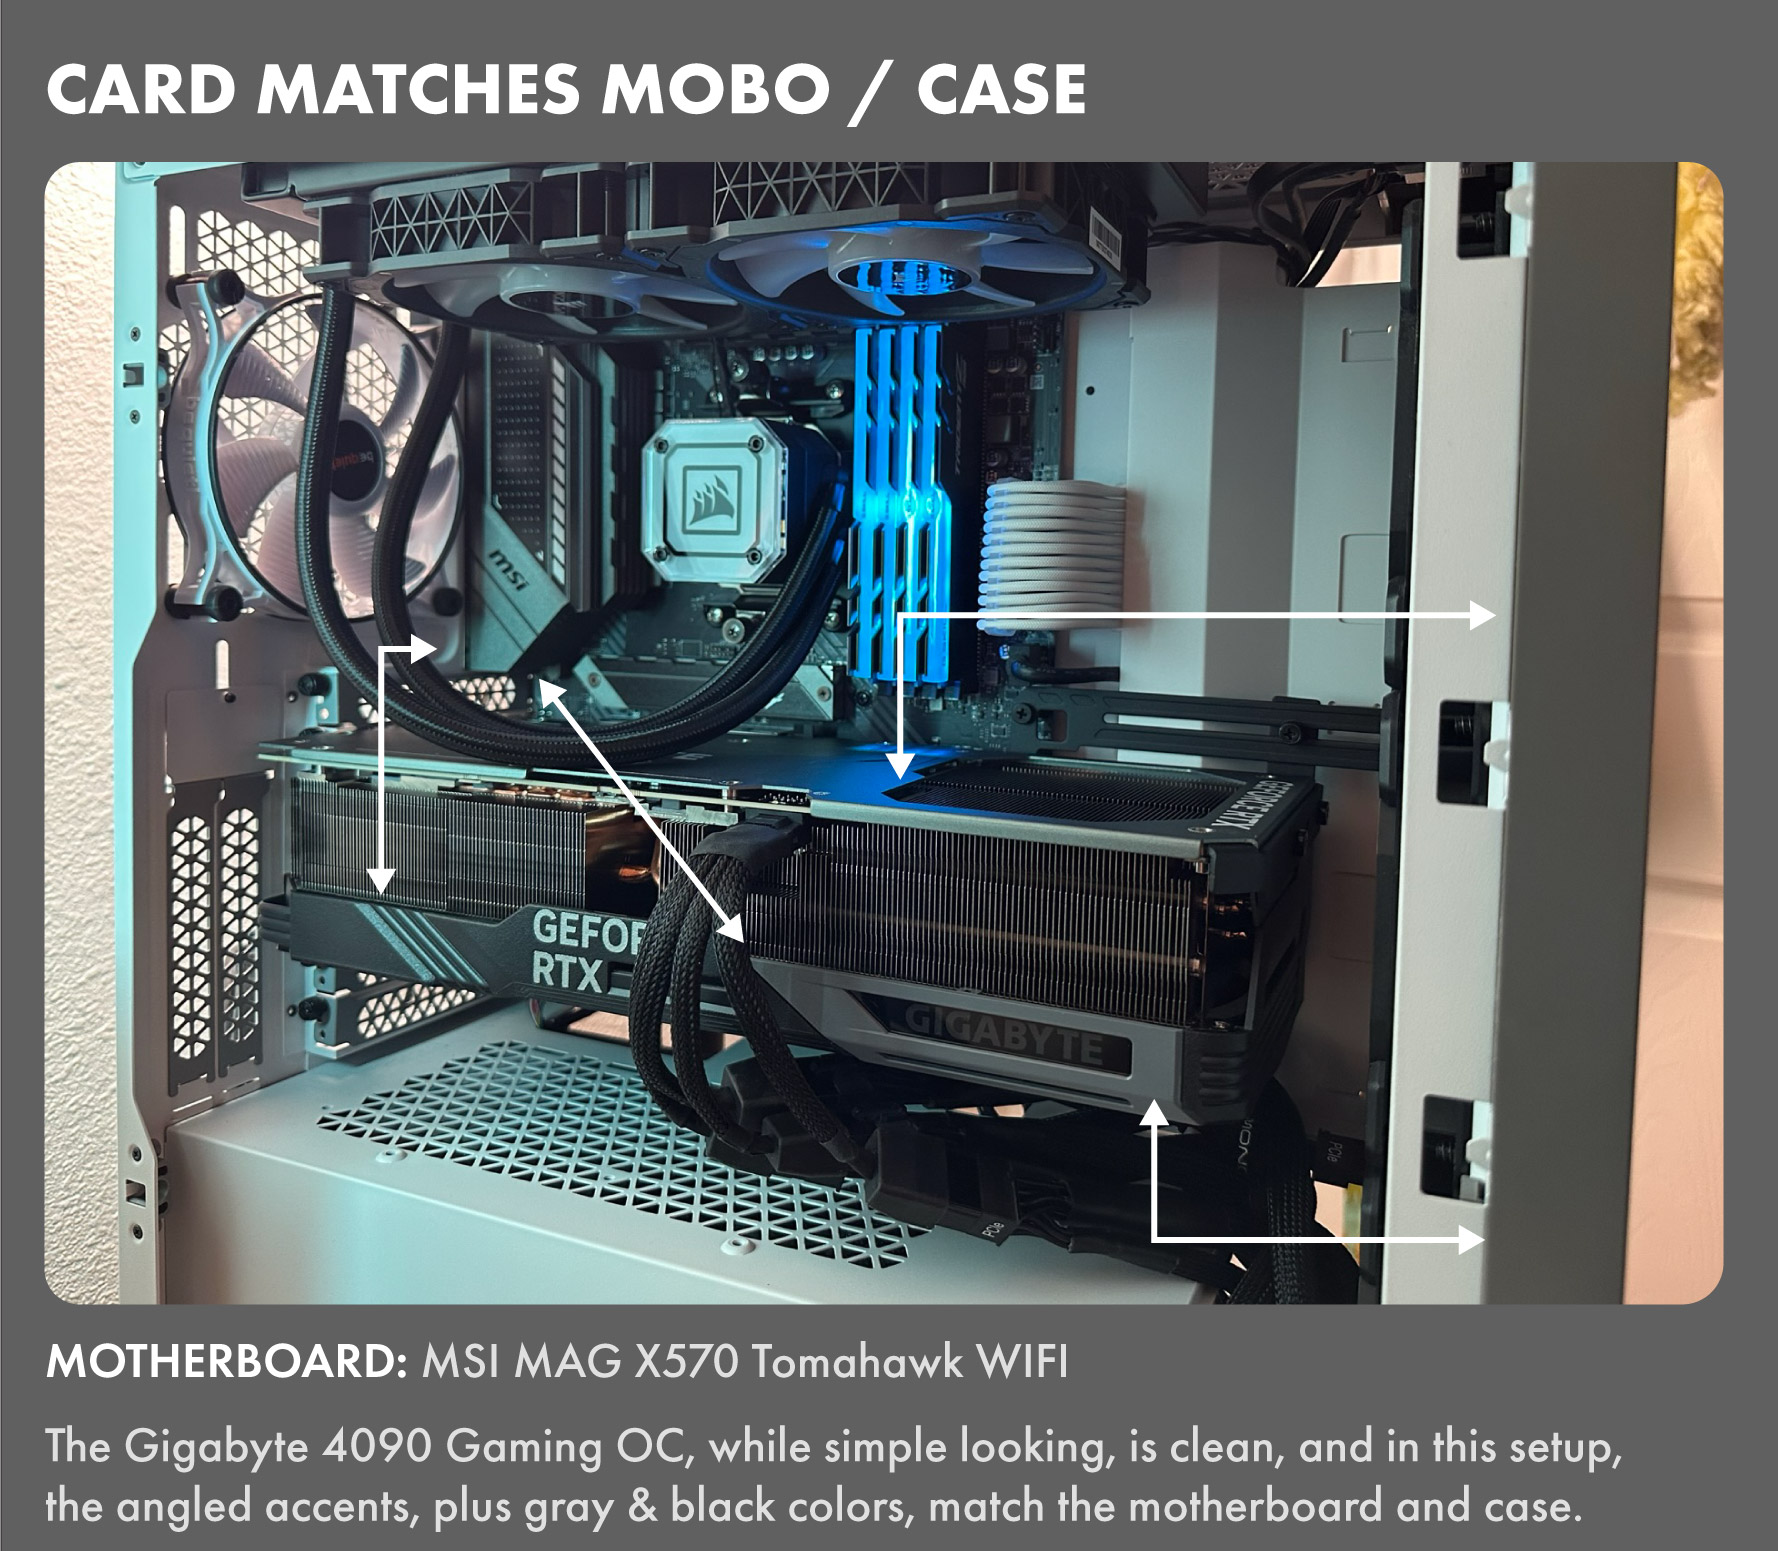 Card-matches-case-and-mobo.jpg